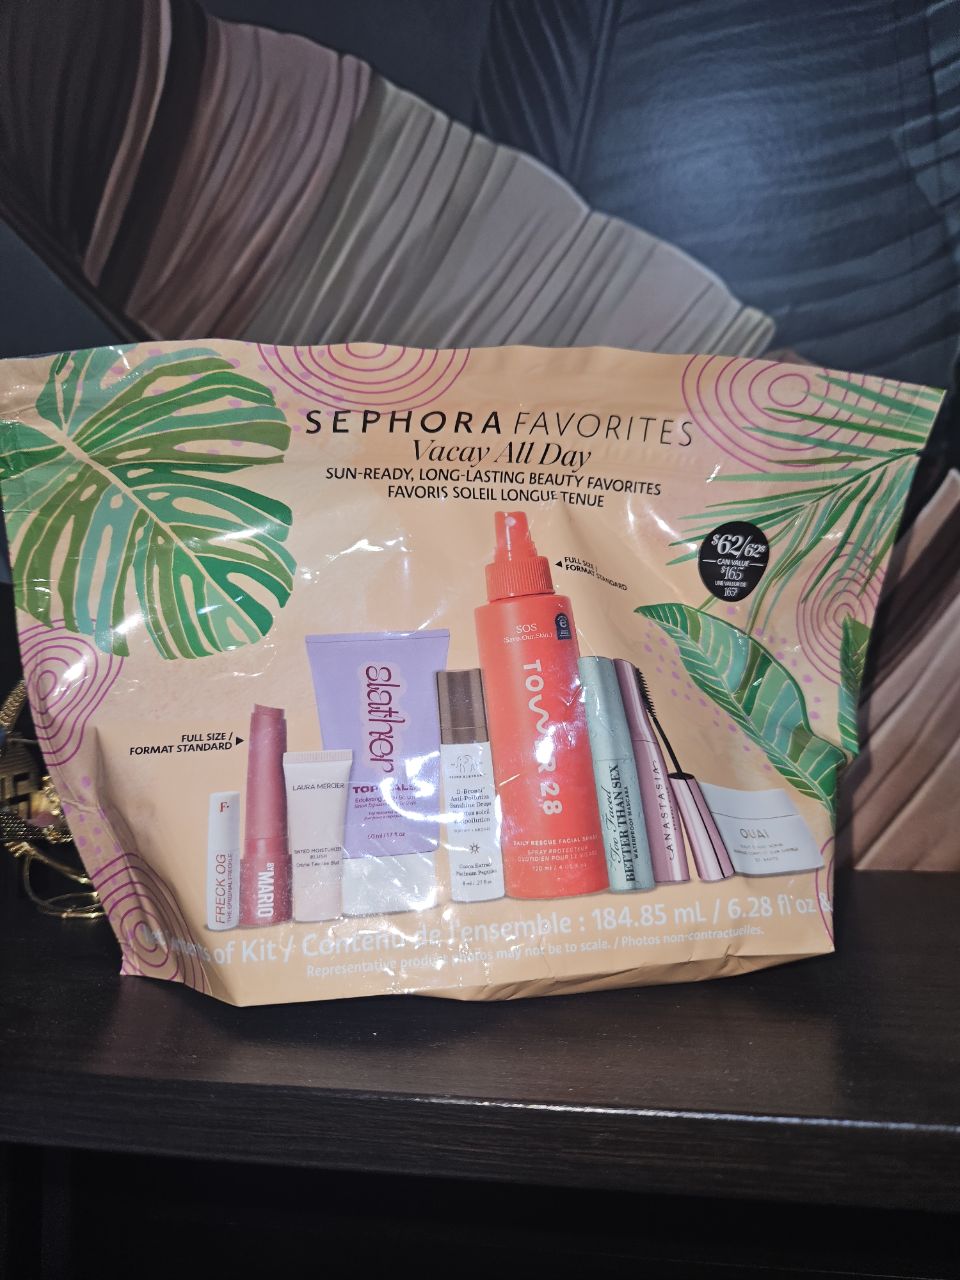 Sephora favorites Vacay all day set